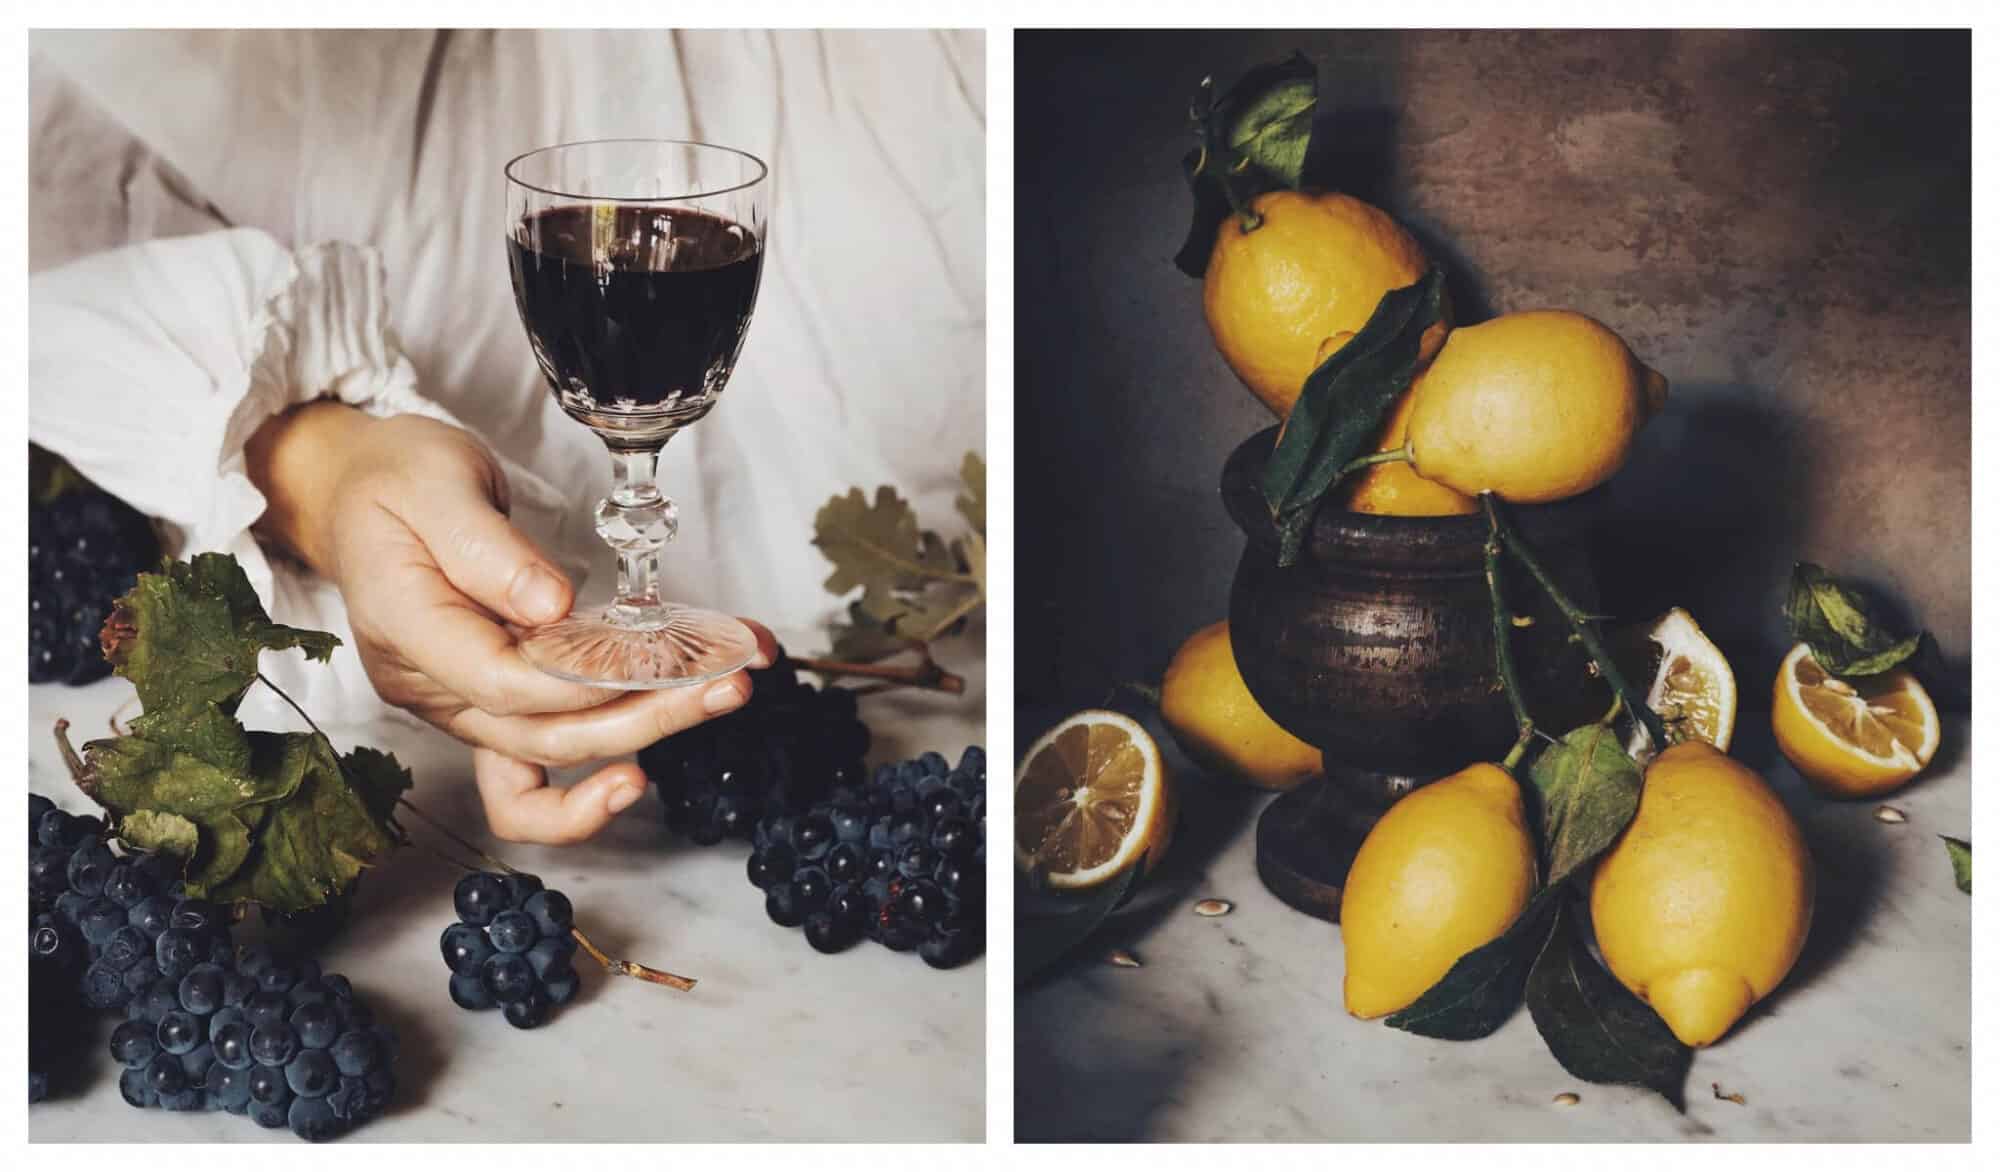 Left: Jamie Beck holds up a glass of wine and there are grapes strewn on the table, Right: lemons and fruits